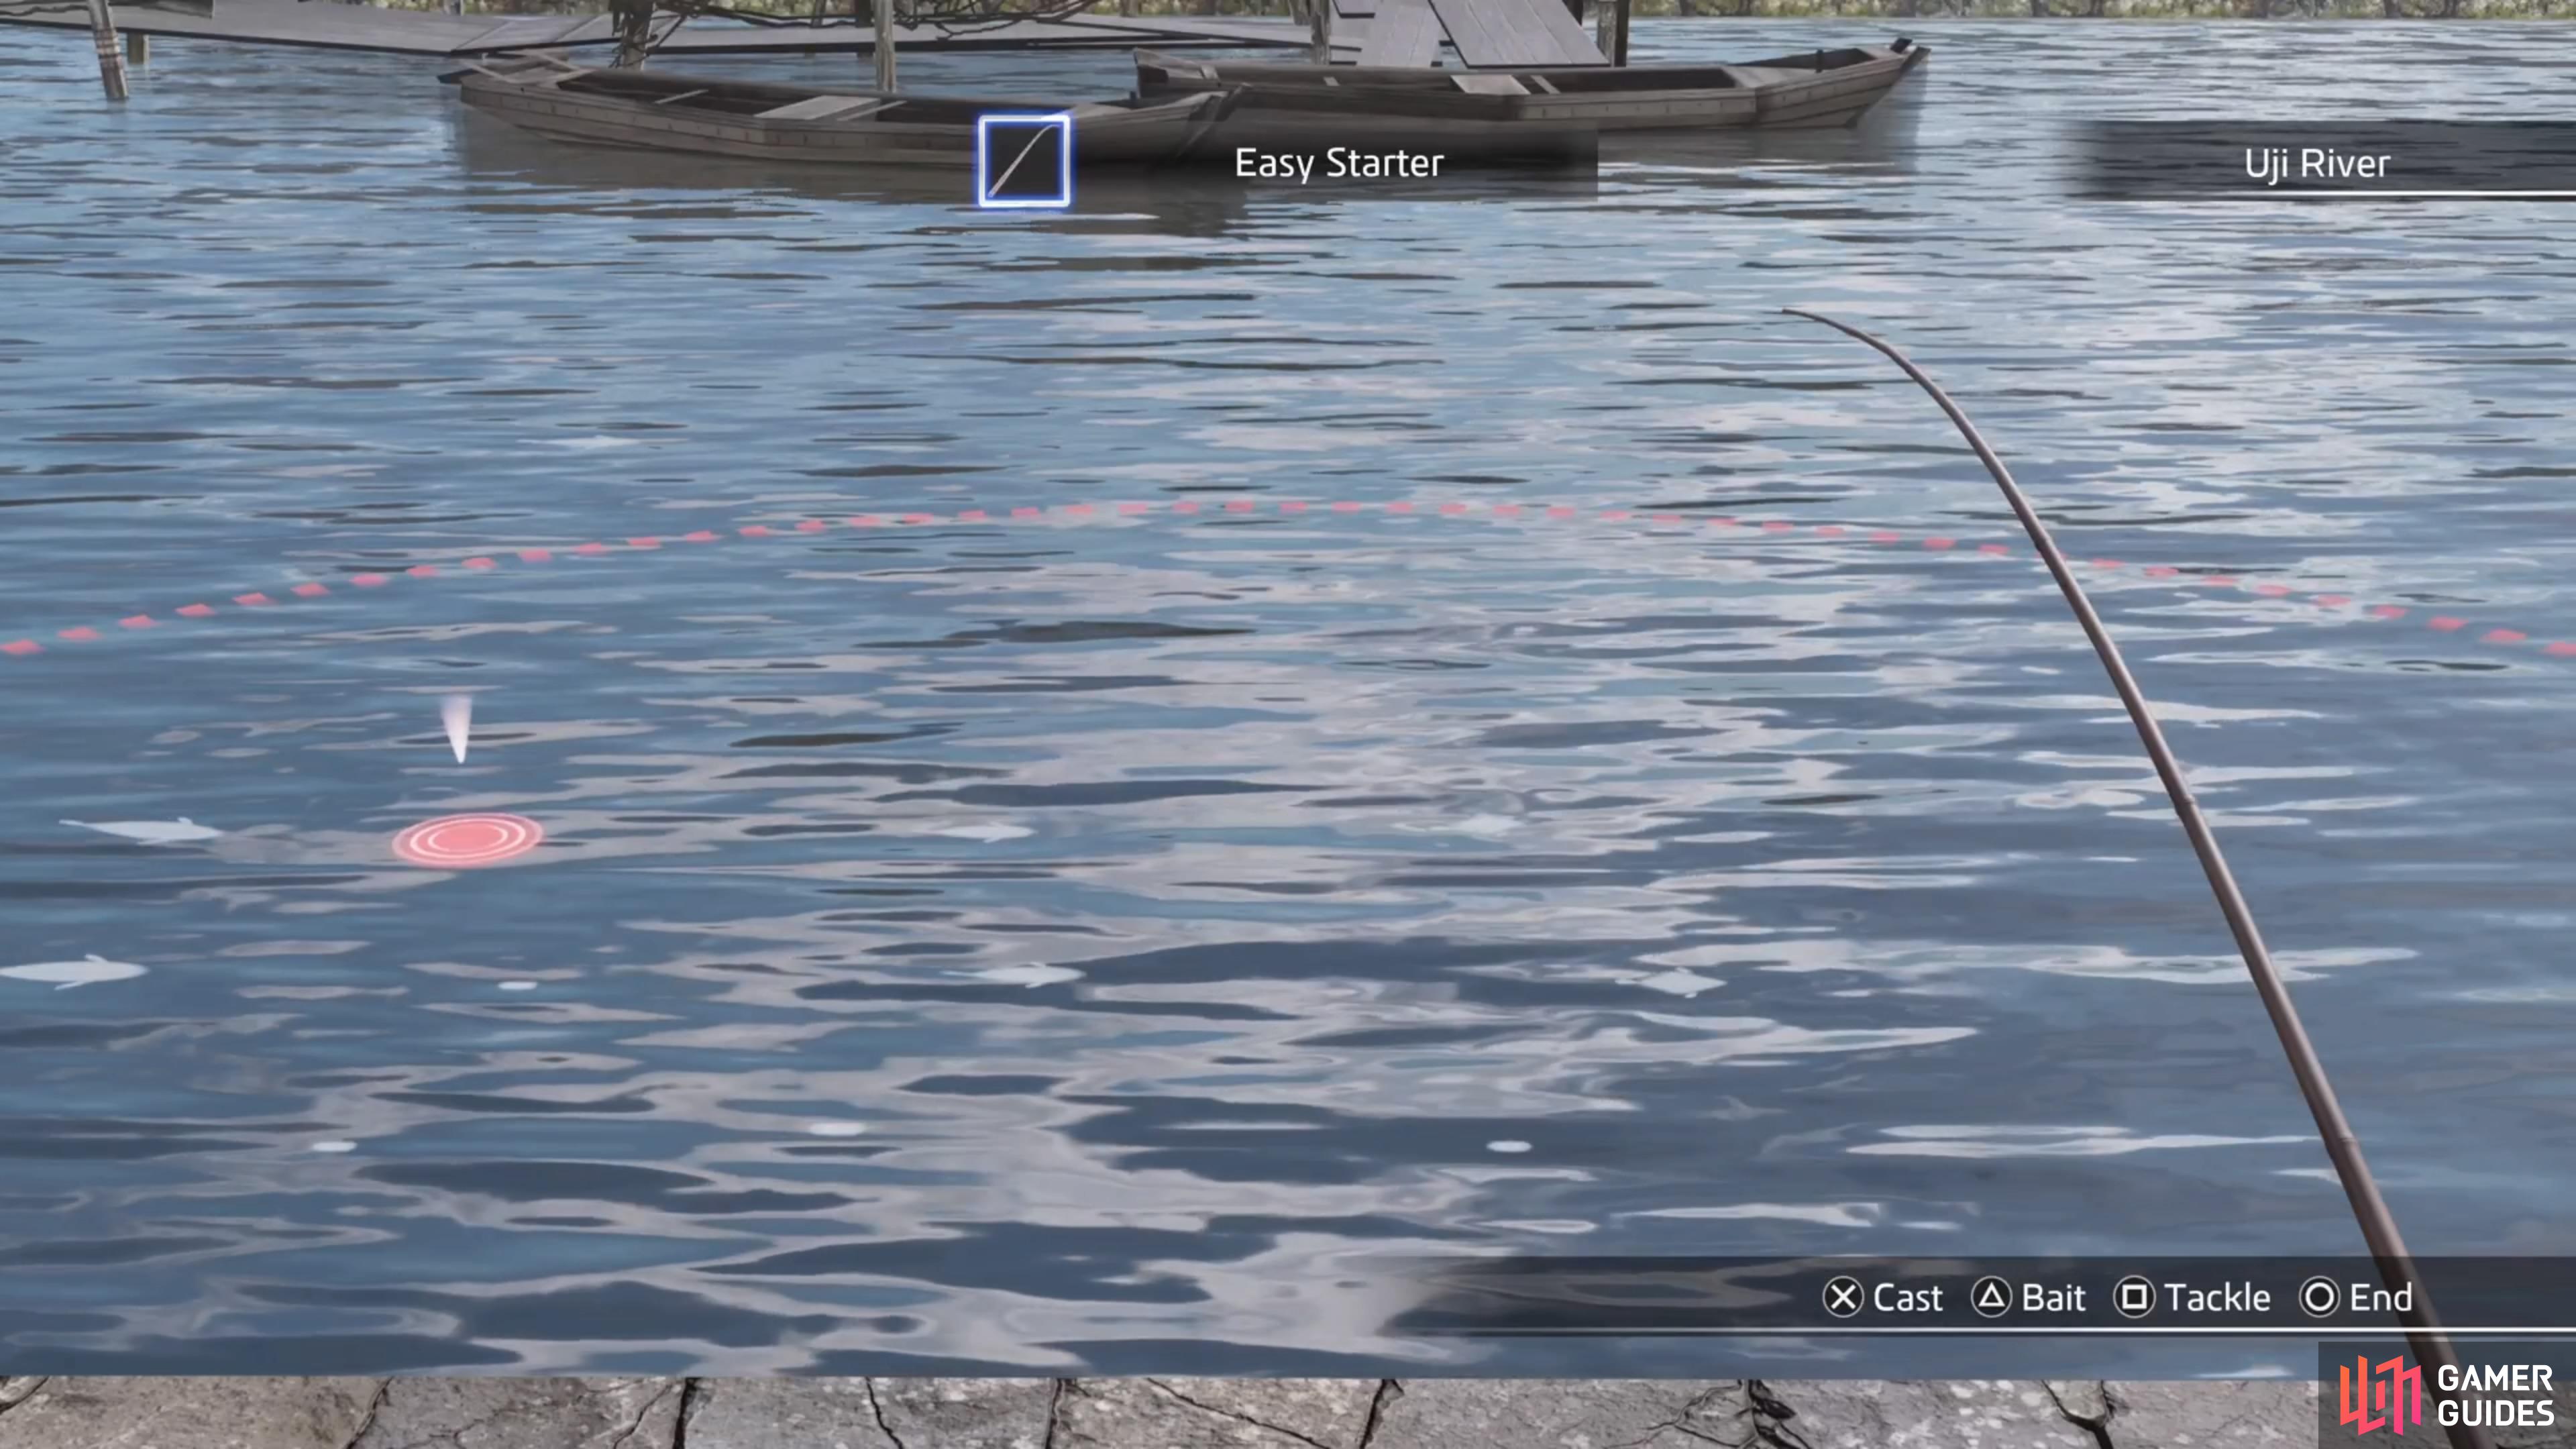 Cast your line near a fish's shadow in the water